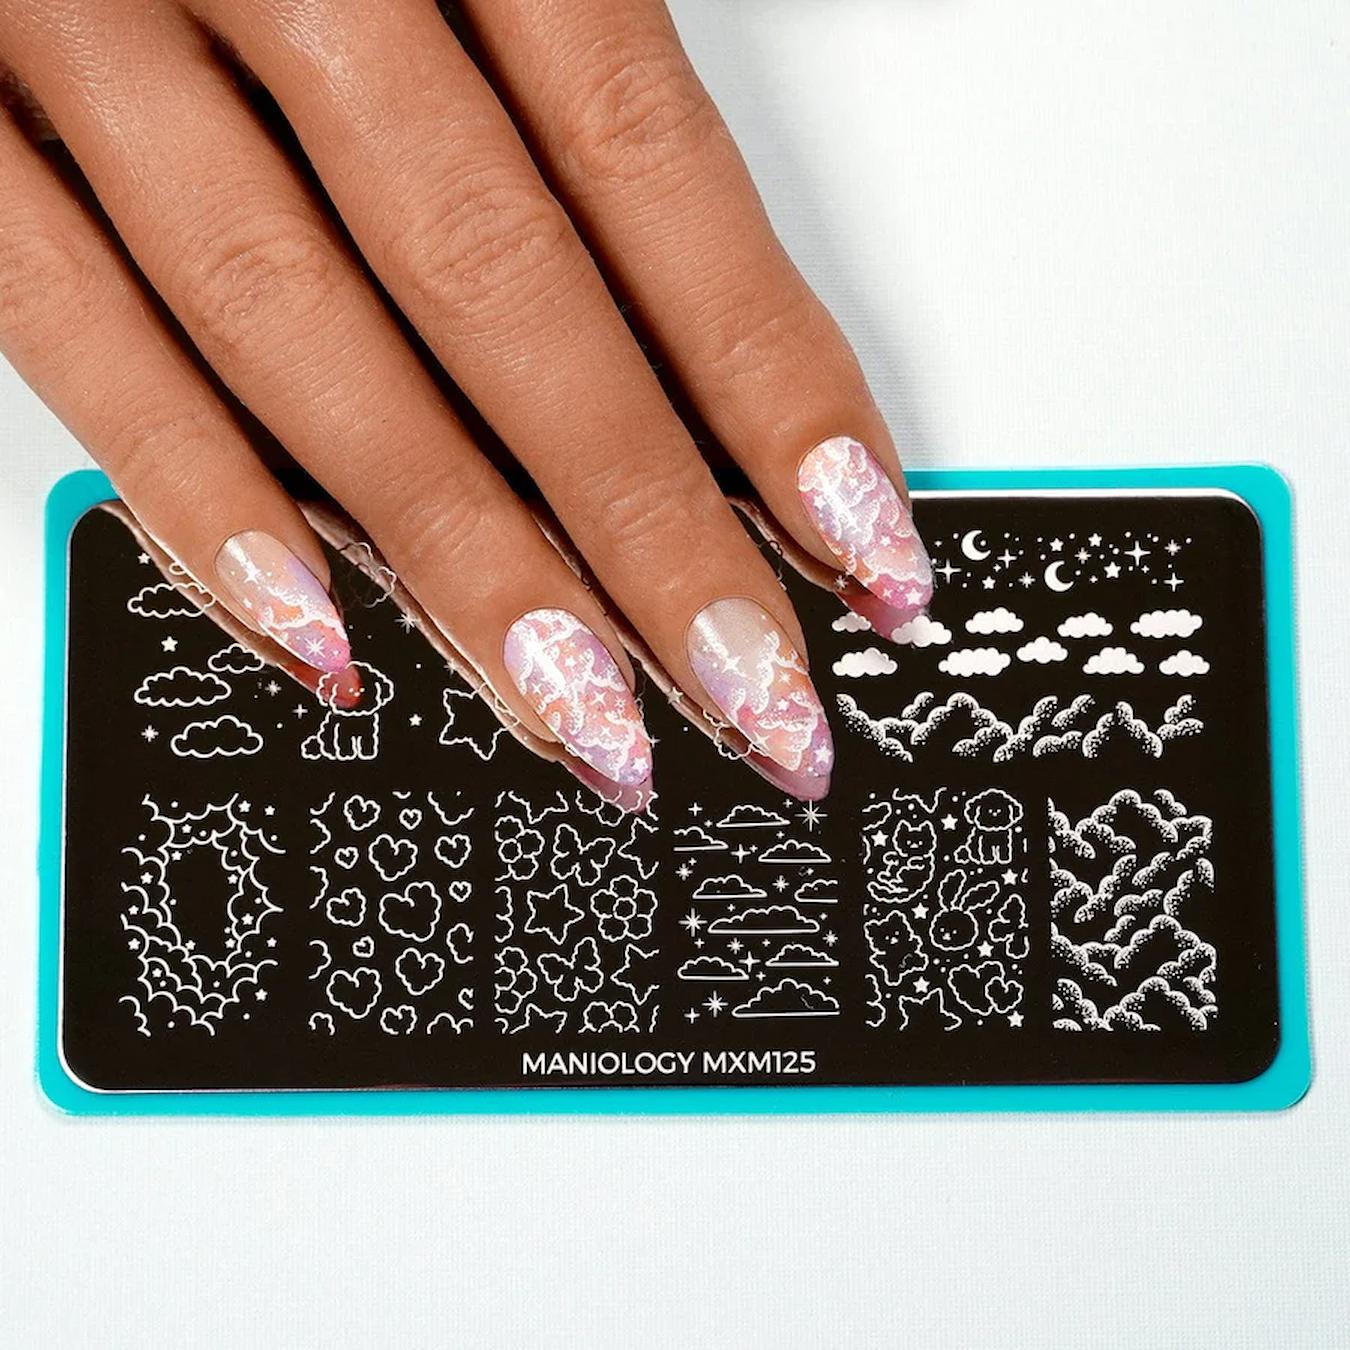 This month’s Mani X Me box gives nail art newbies and pros alike a chance to recreate magical manicure designs at home.